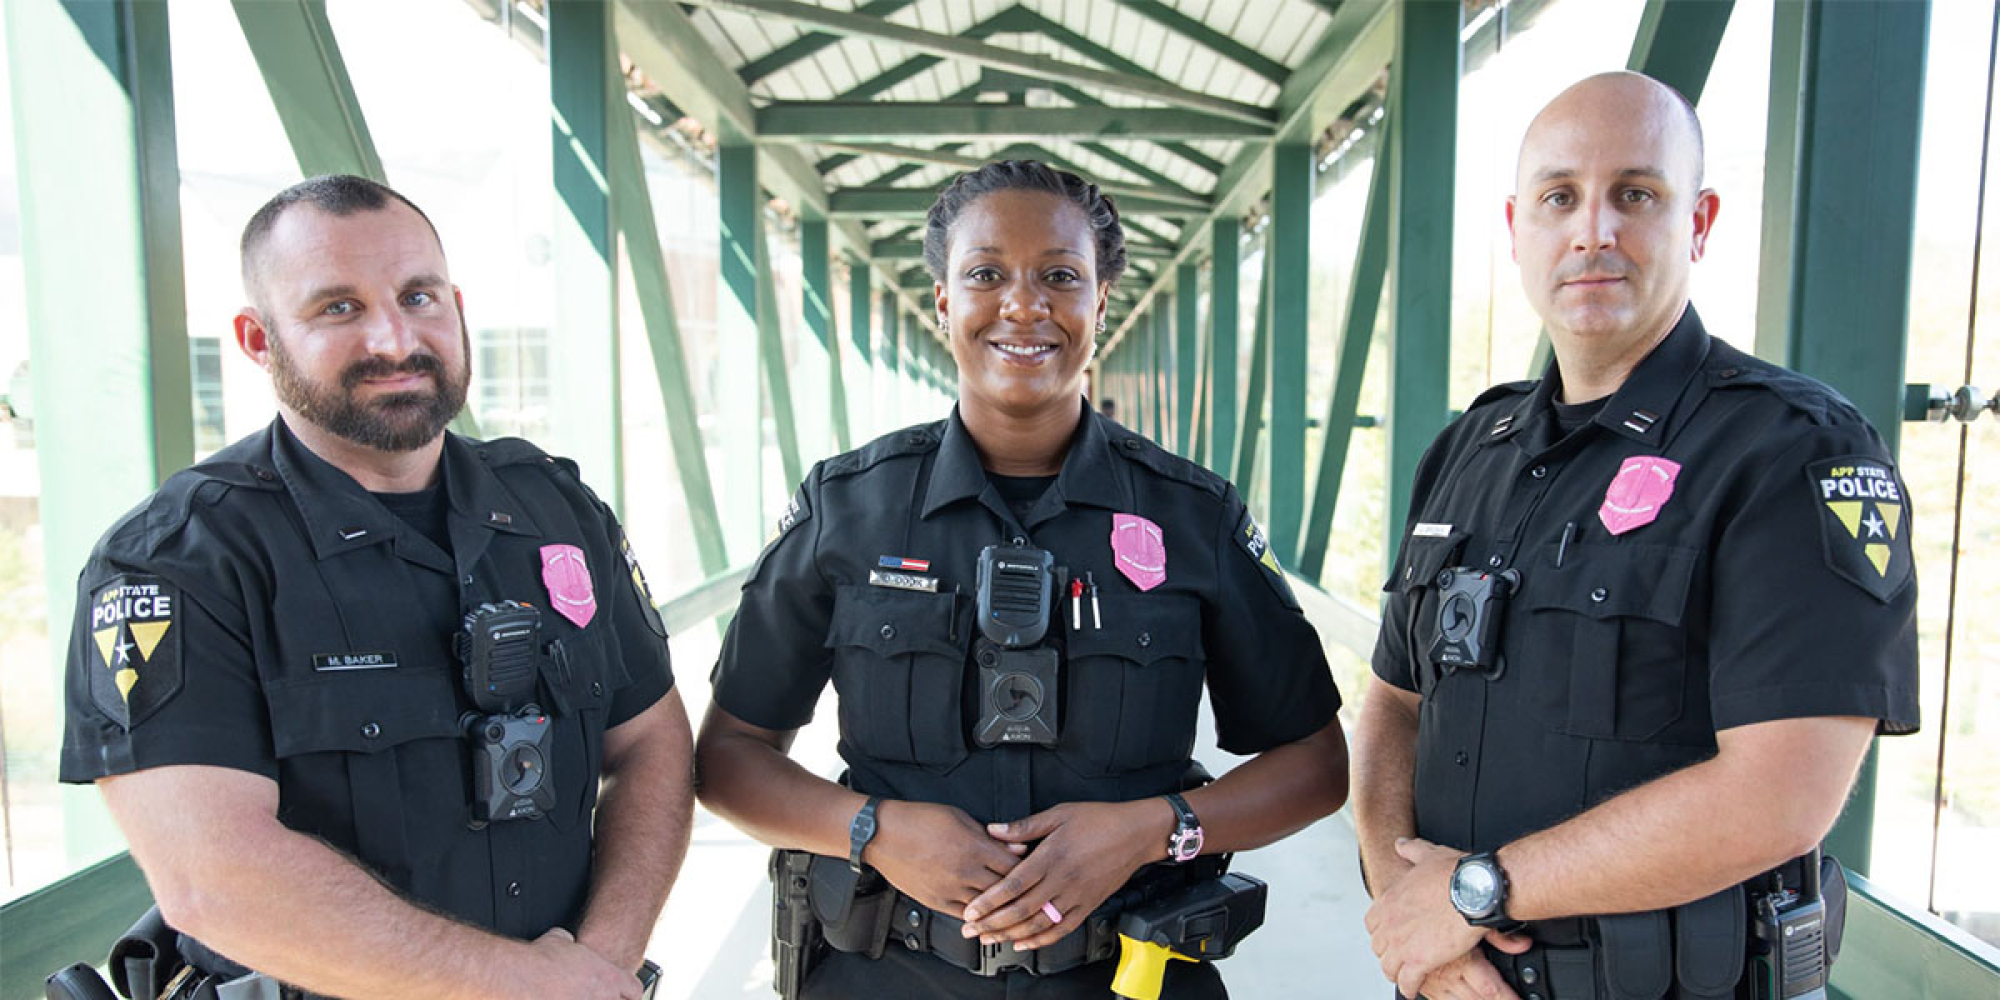 Police officers wearing pink badges